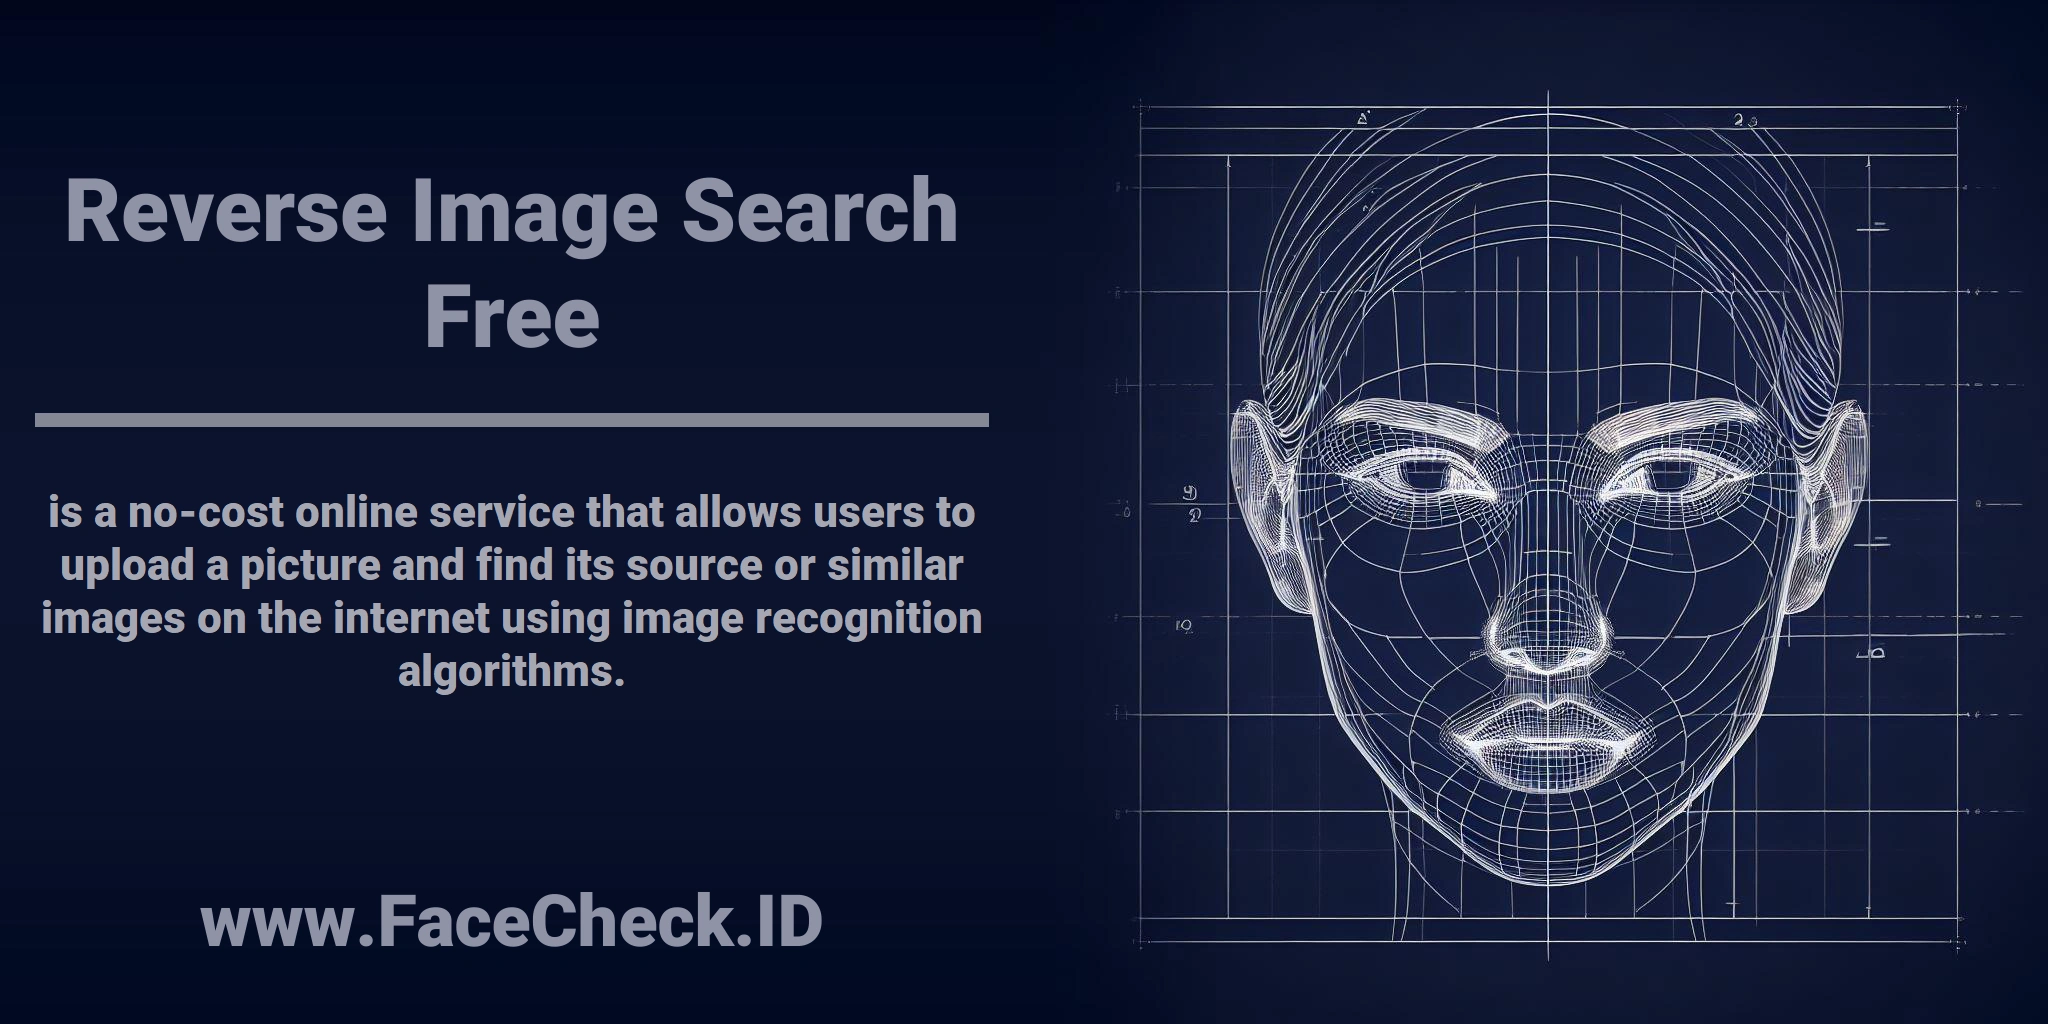 <b>Reverse Image Search Free</b> is a no-cost online service that allows users to upload a picture and find its source or similar images on the internet using image recognition algorithms.